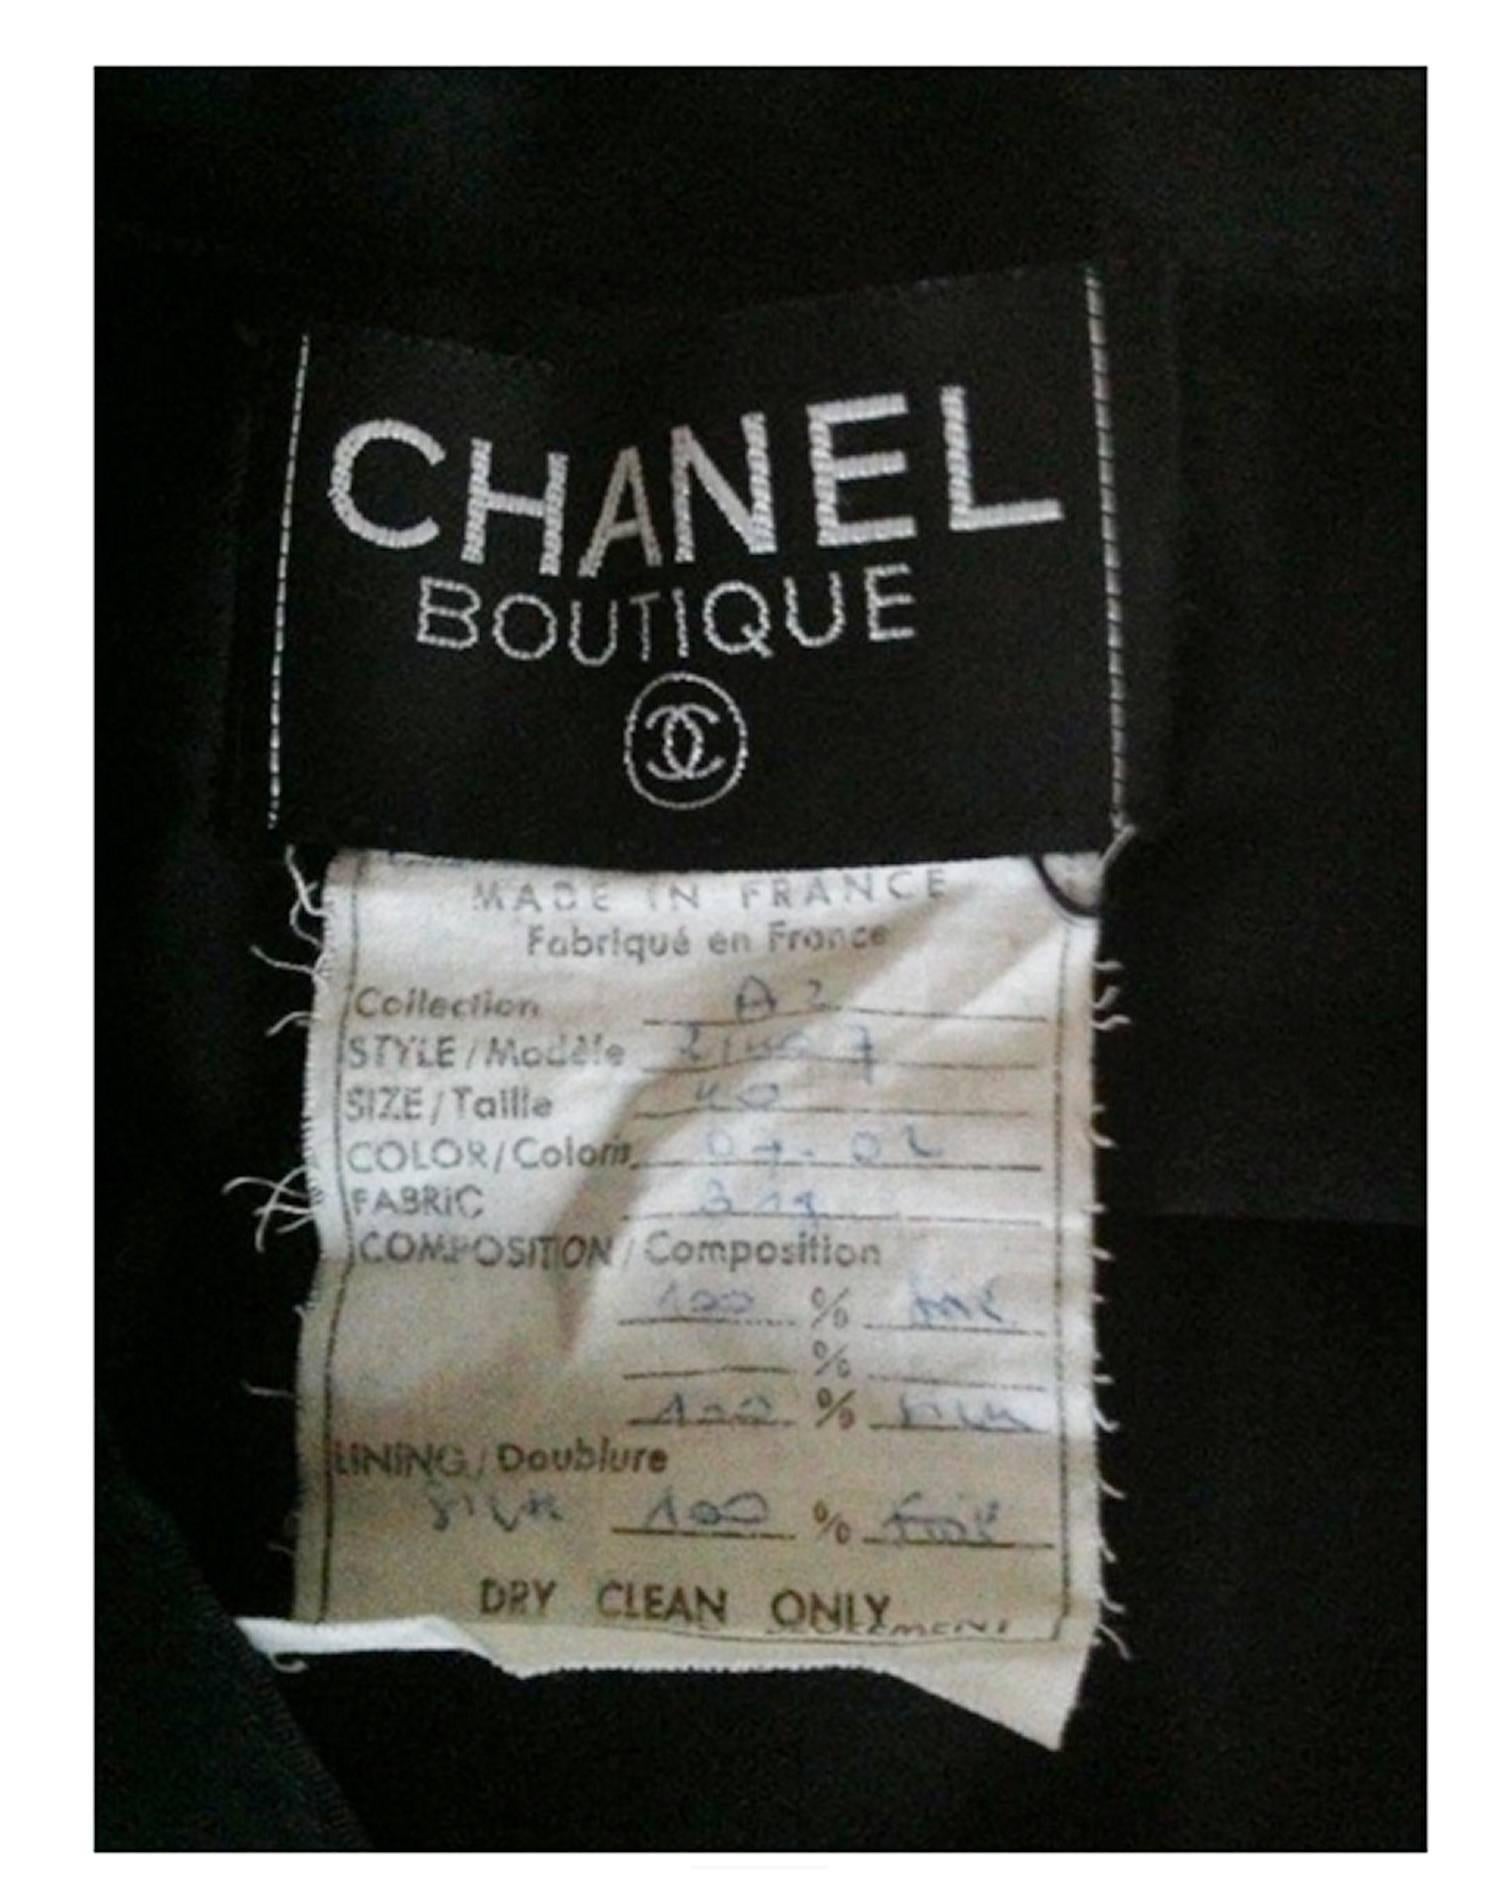 Chanel boutique vintage quilted puffer silk jacket, 1990s campaign